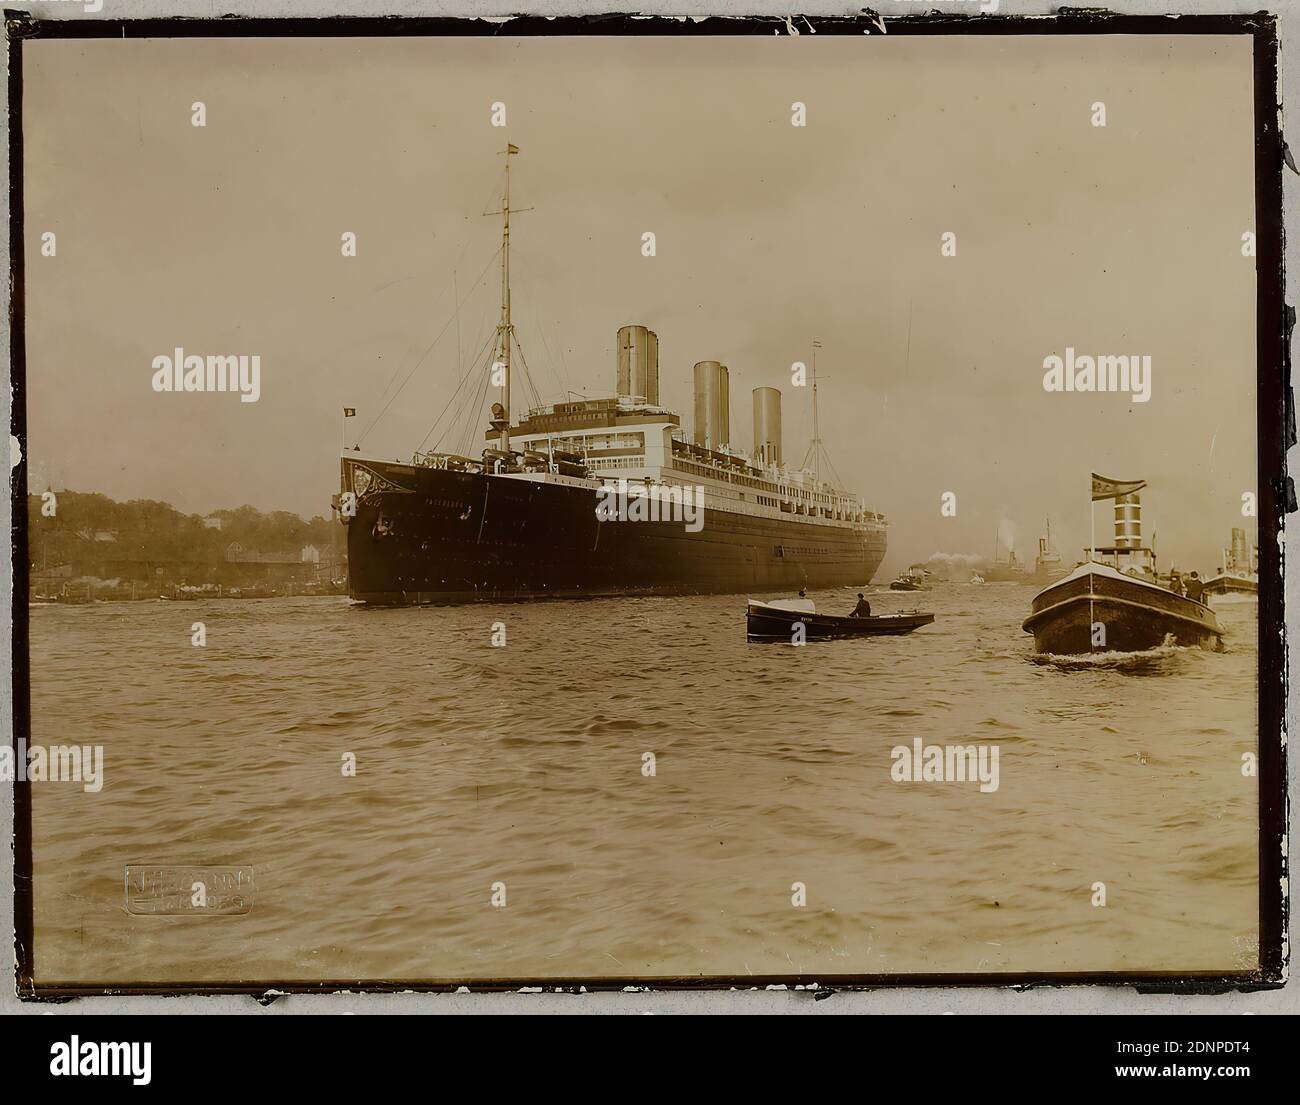 Heinrich Hamann, Atelier J. Hamann, Johann Hinrich W. Hamann, HAPAG steamship Vaterland on the Elbe and school on Krausestraße in Hamburg-Dulsberg, collodion paper, black and white positive process, picture size (Photo 1 Vaterland): height: 15.90 cm; width: 20.90 cm, dry stamp: bei Vaterland recto u. left: J. HAMANN, Hamburg; school on Krausestr. recto and right: J. HAMANN, Hamburg, stamp: twice on the photo of the school on Krausestr.: J. Hamann, Hamburg 1, Neustädterstr, 66/68, studio for photography of all kinds, awarded Hamburg 1899, reporting photography, ships, river Stock Photo